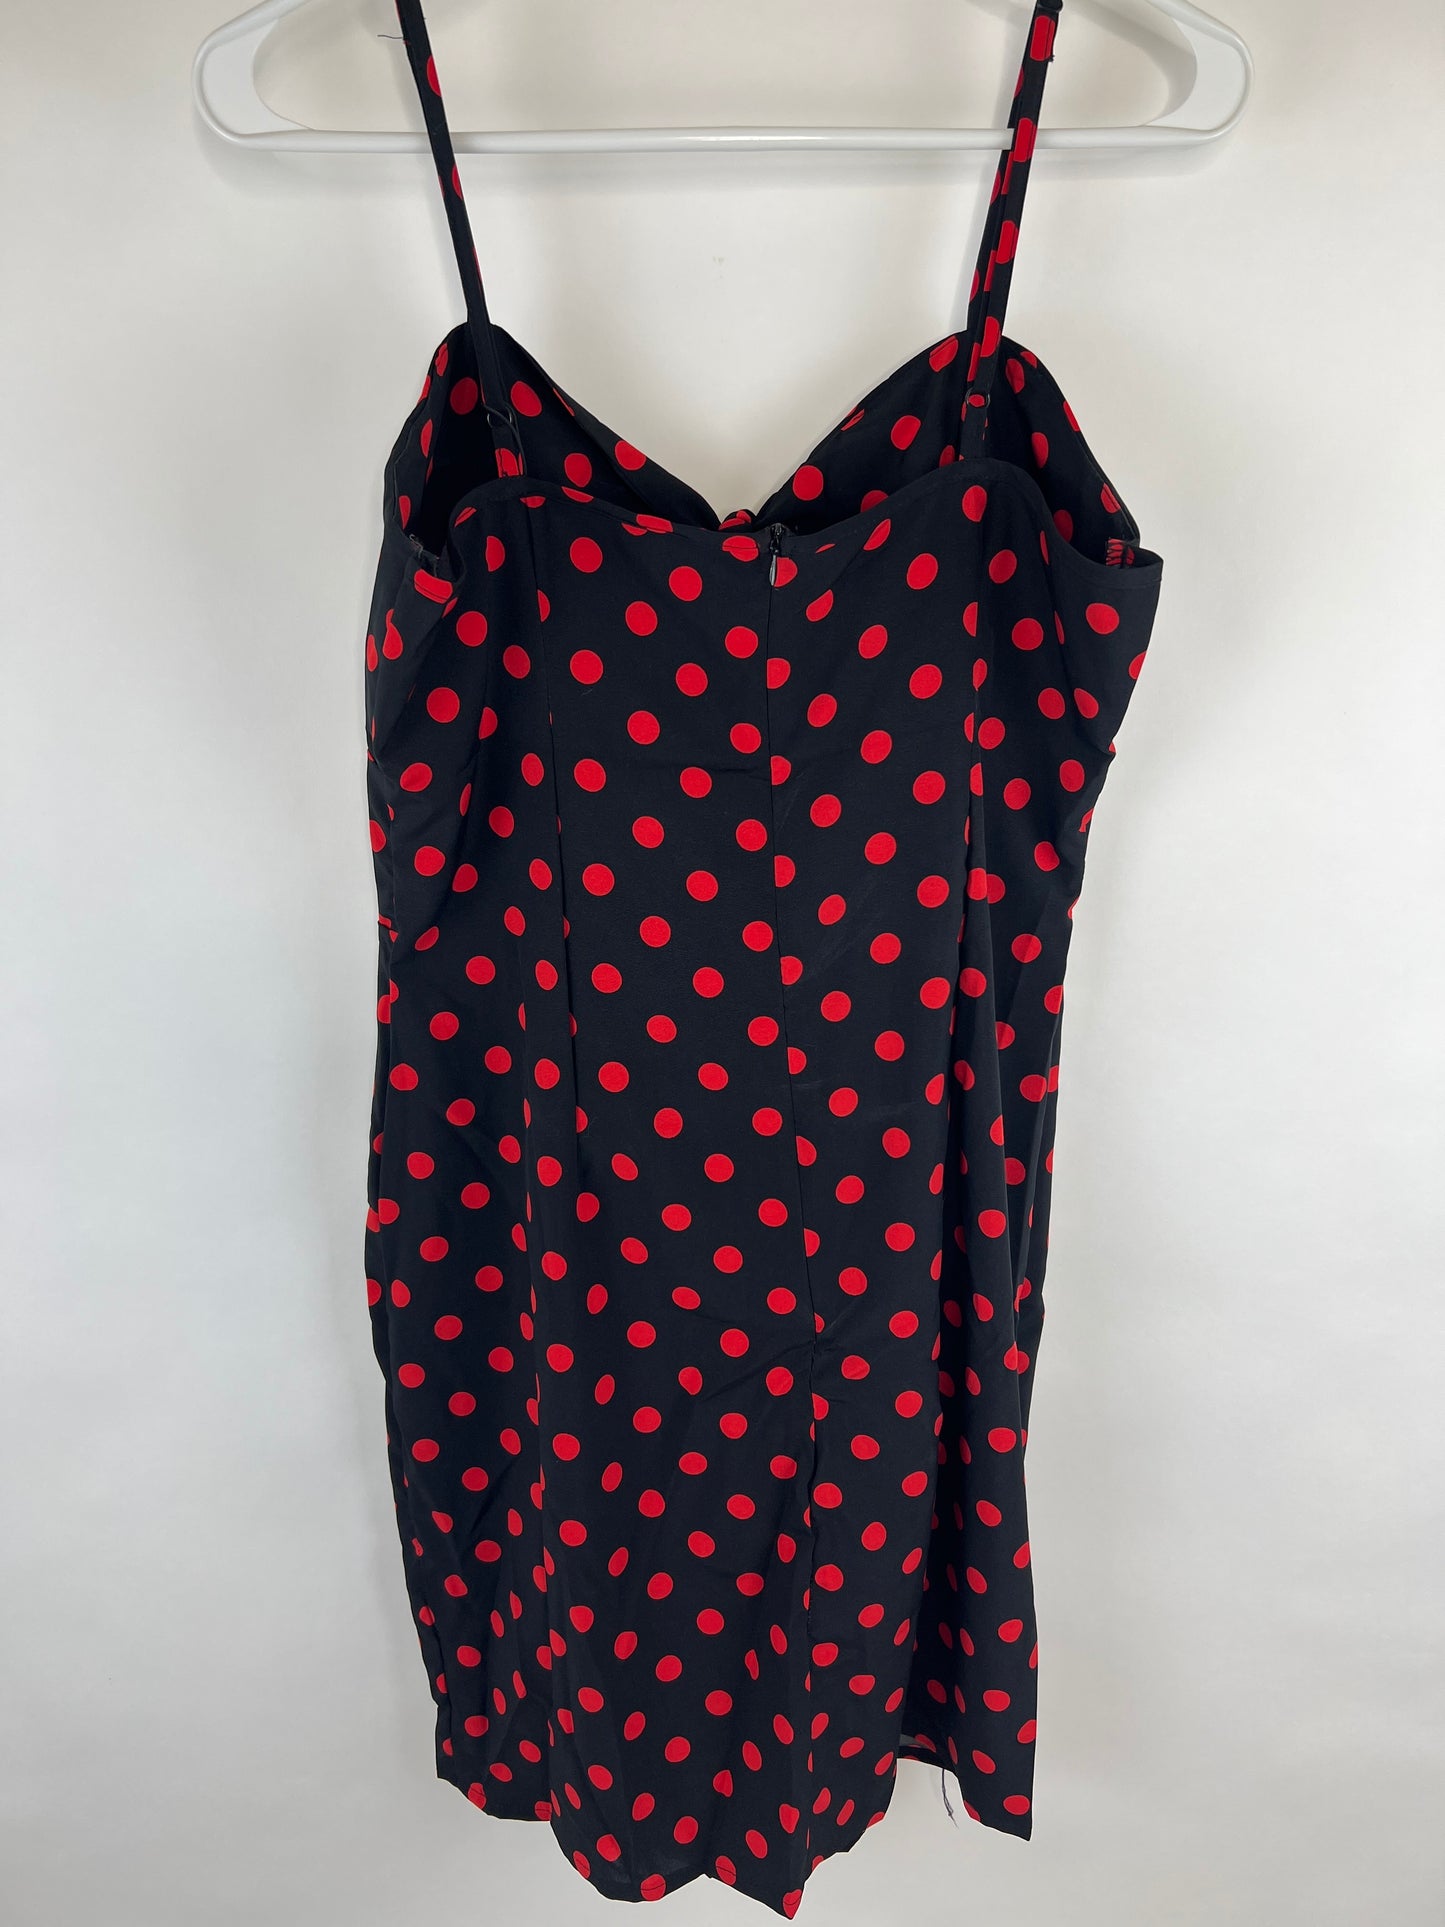 NWT - Tie Front Black with Red Dots Spaghetti Strap Mini Dress - S/M